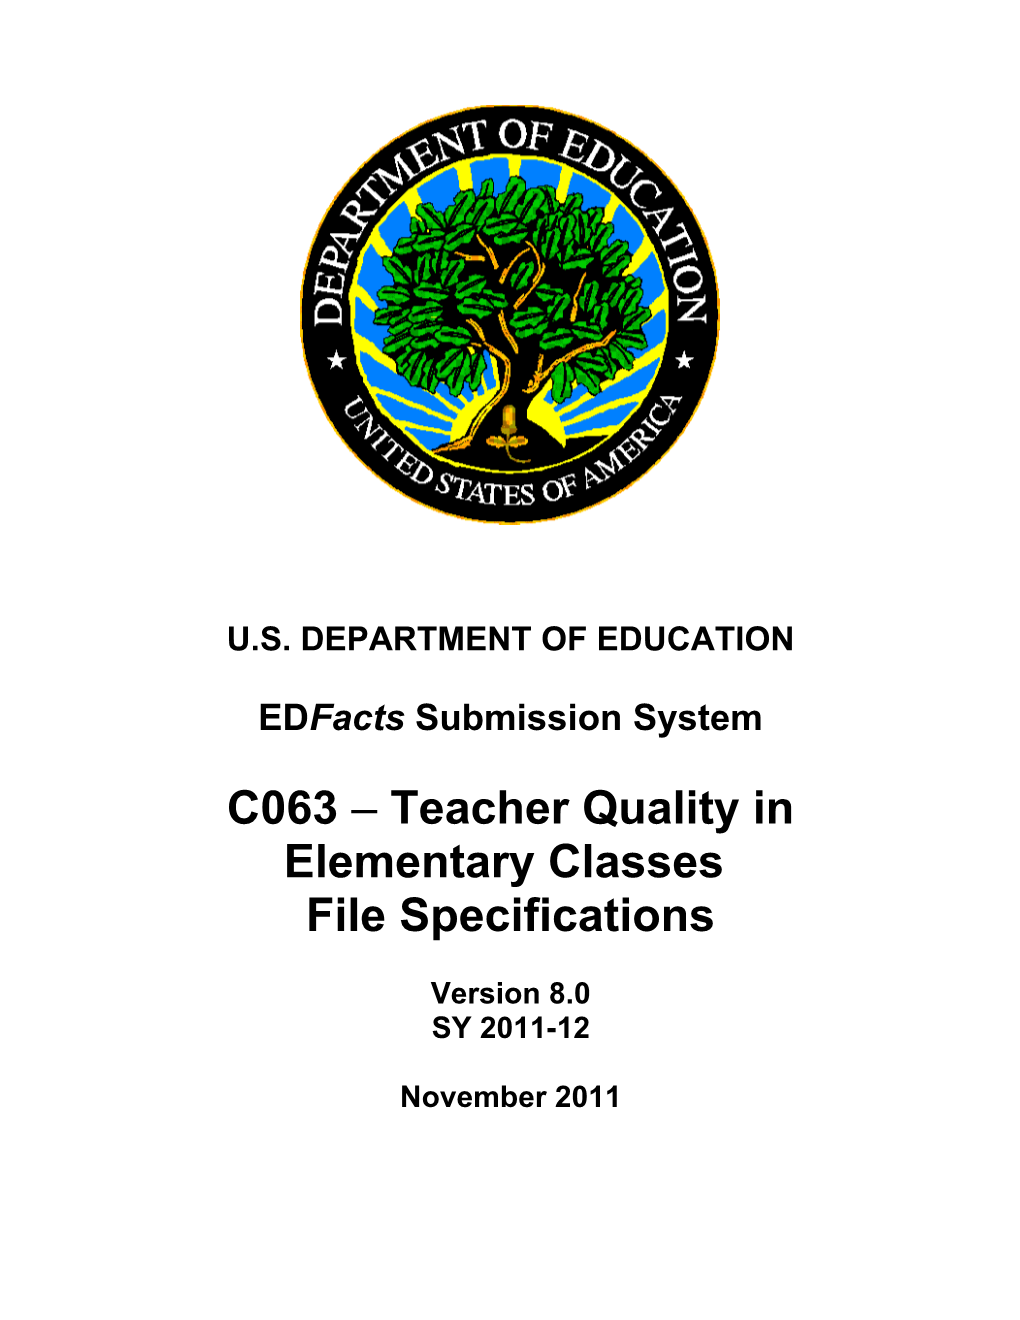 Teacher Quality in Elementary Classes File Specifications